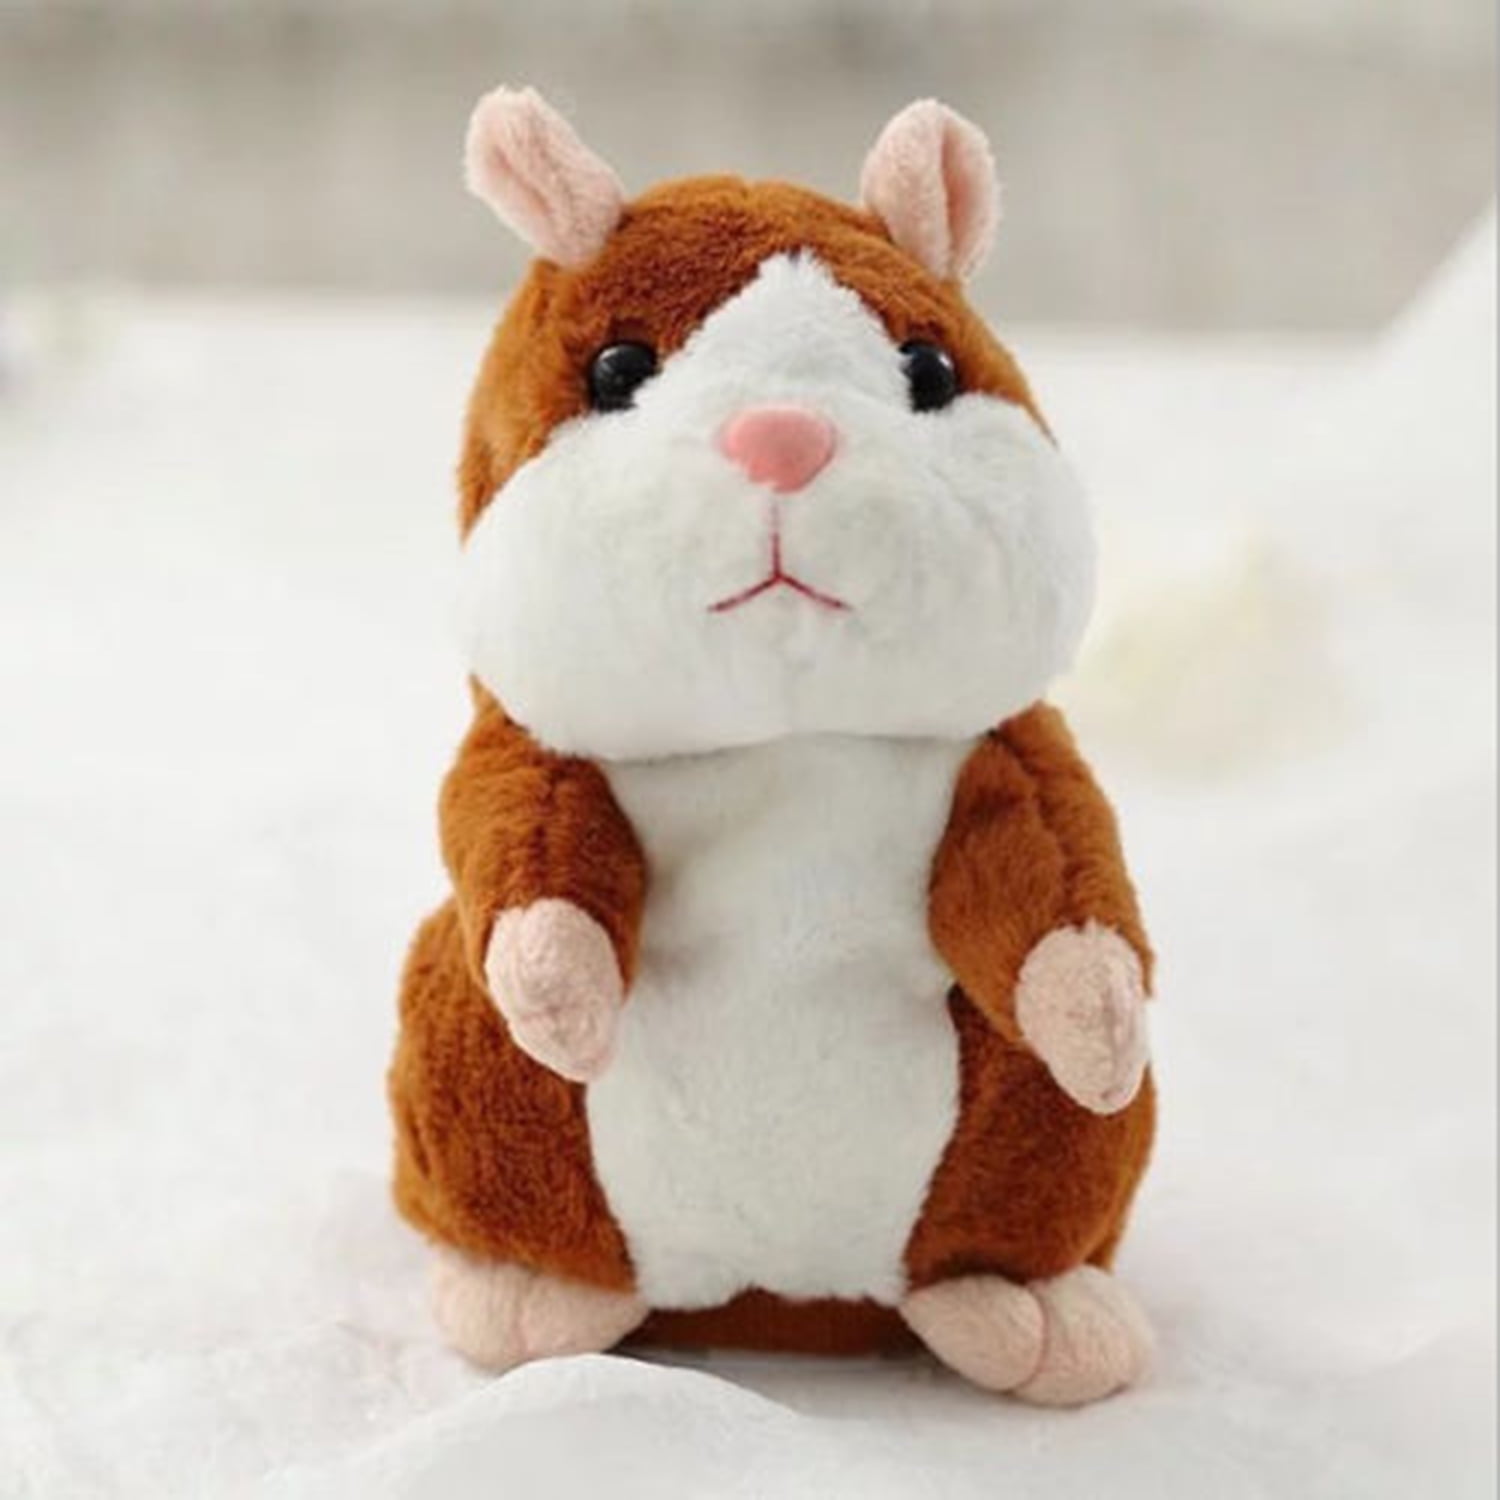 Cheeky Hamster Talking Nodding Sound Record Electric Toy Xmas Gift kid 